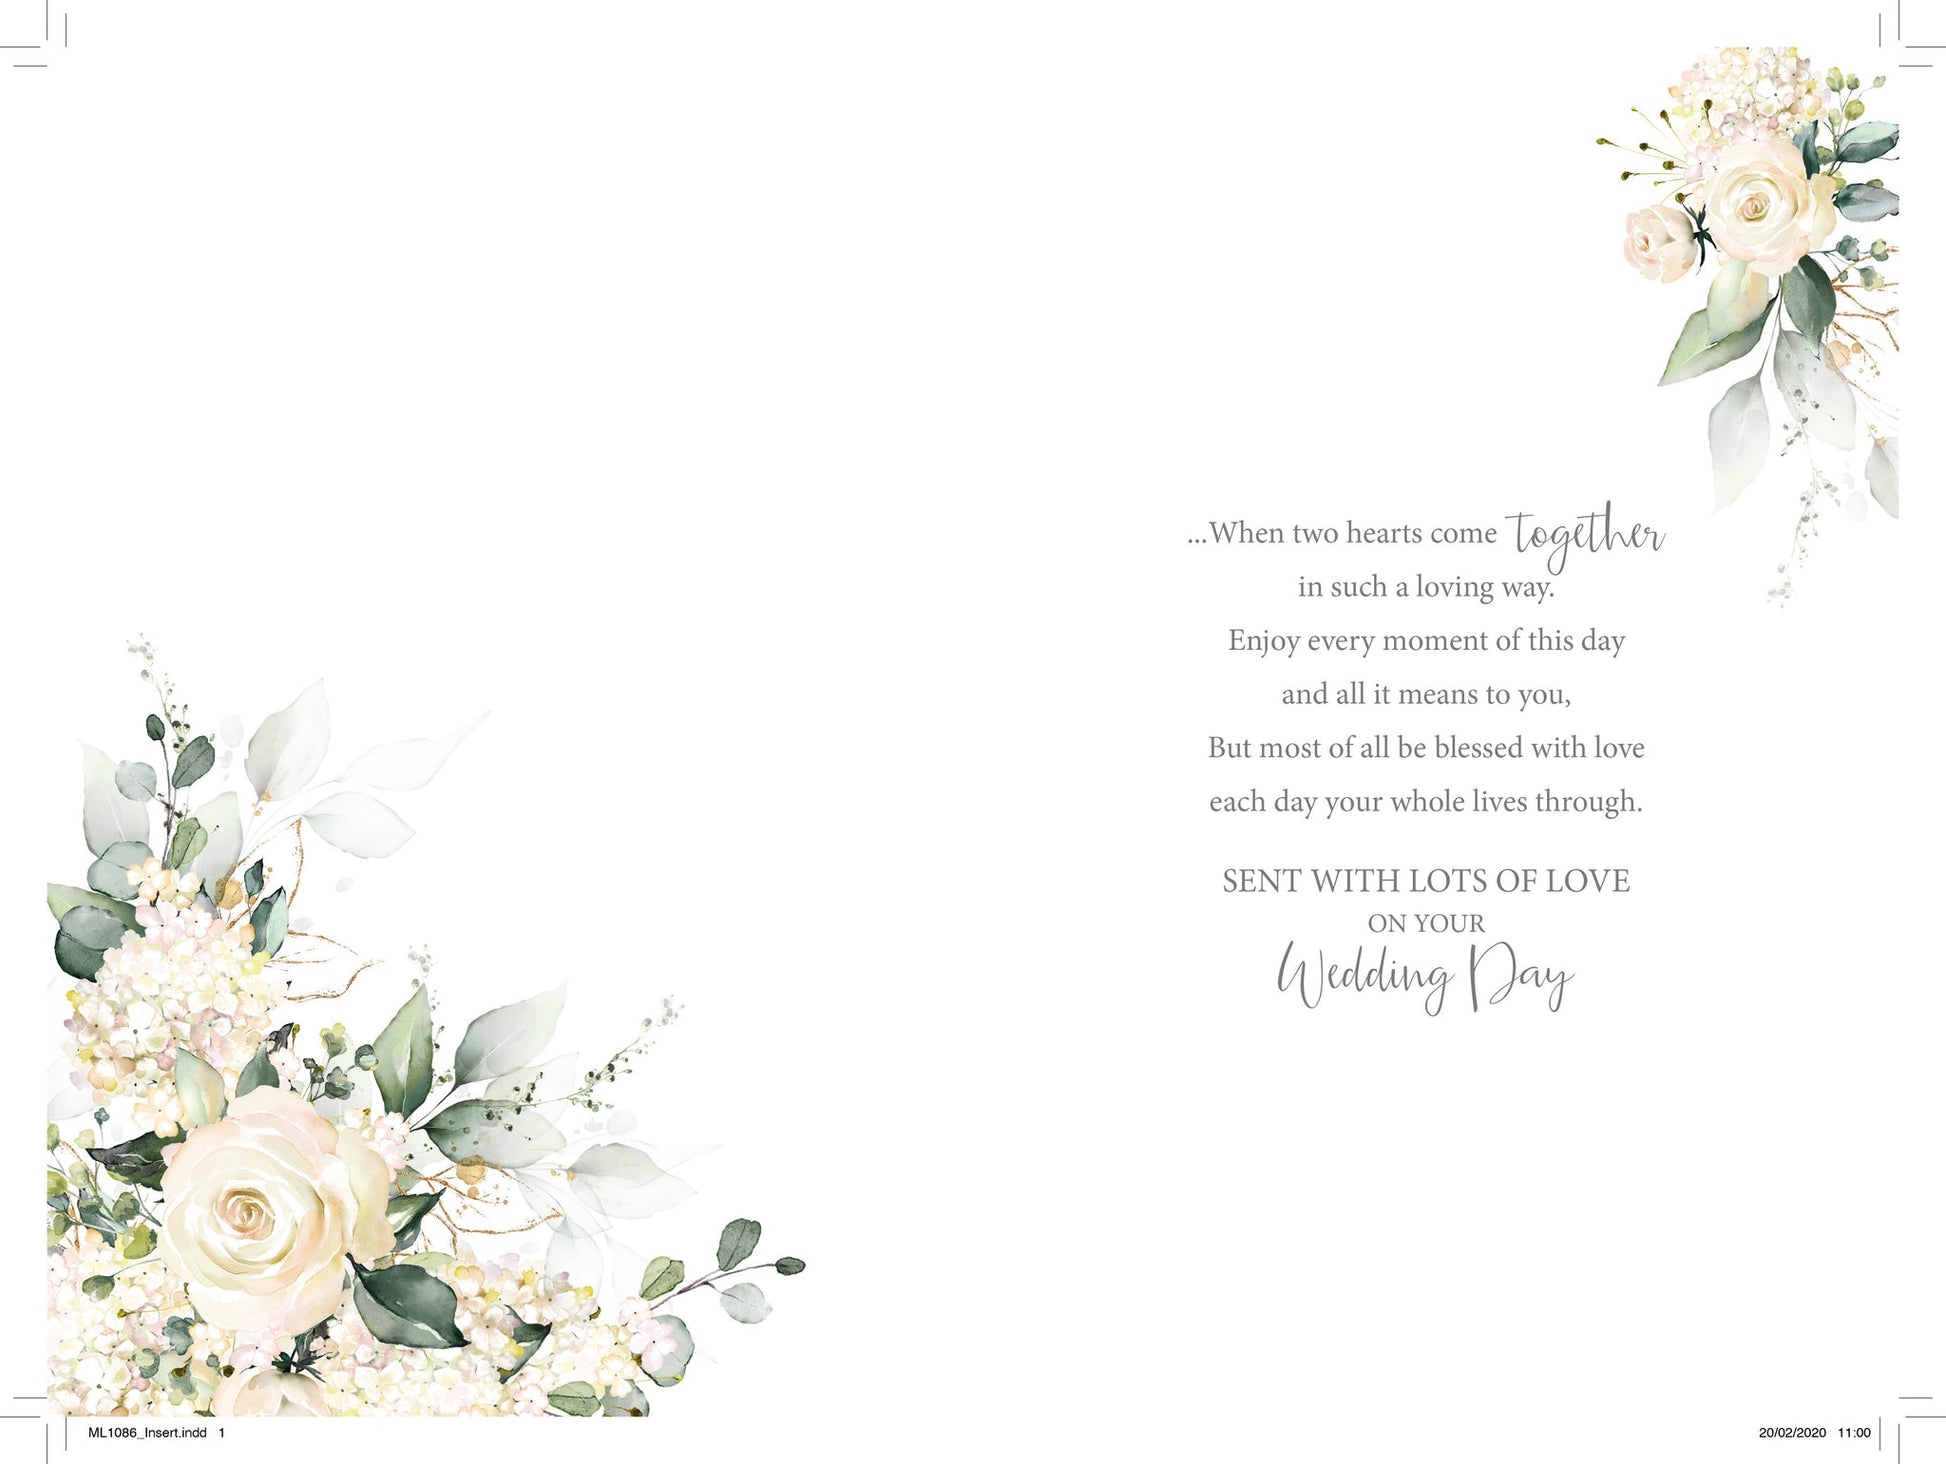 Daughter and Husband Wedding Day Greeting Card (inside)